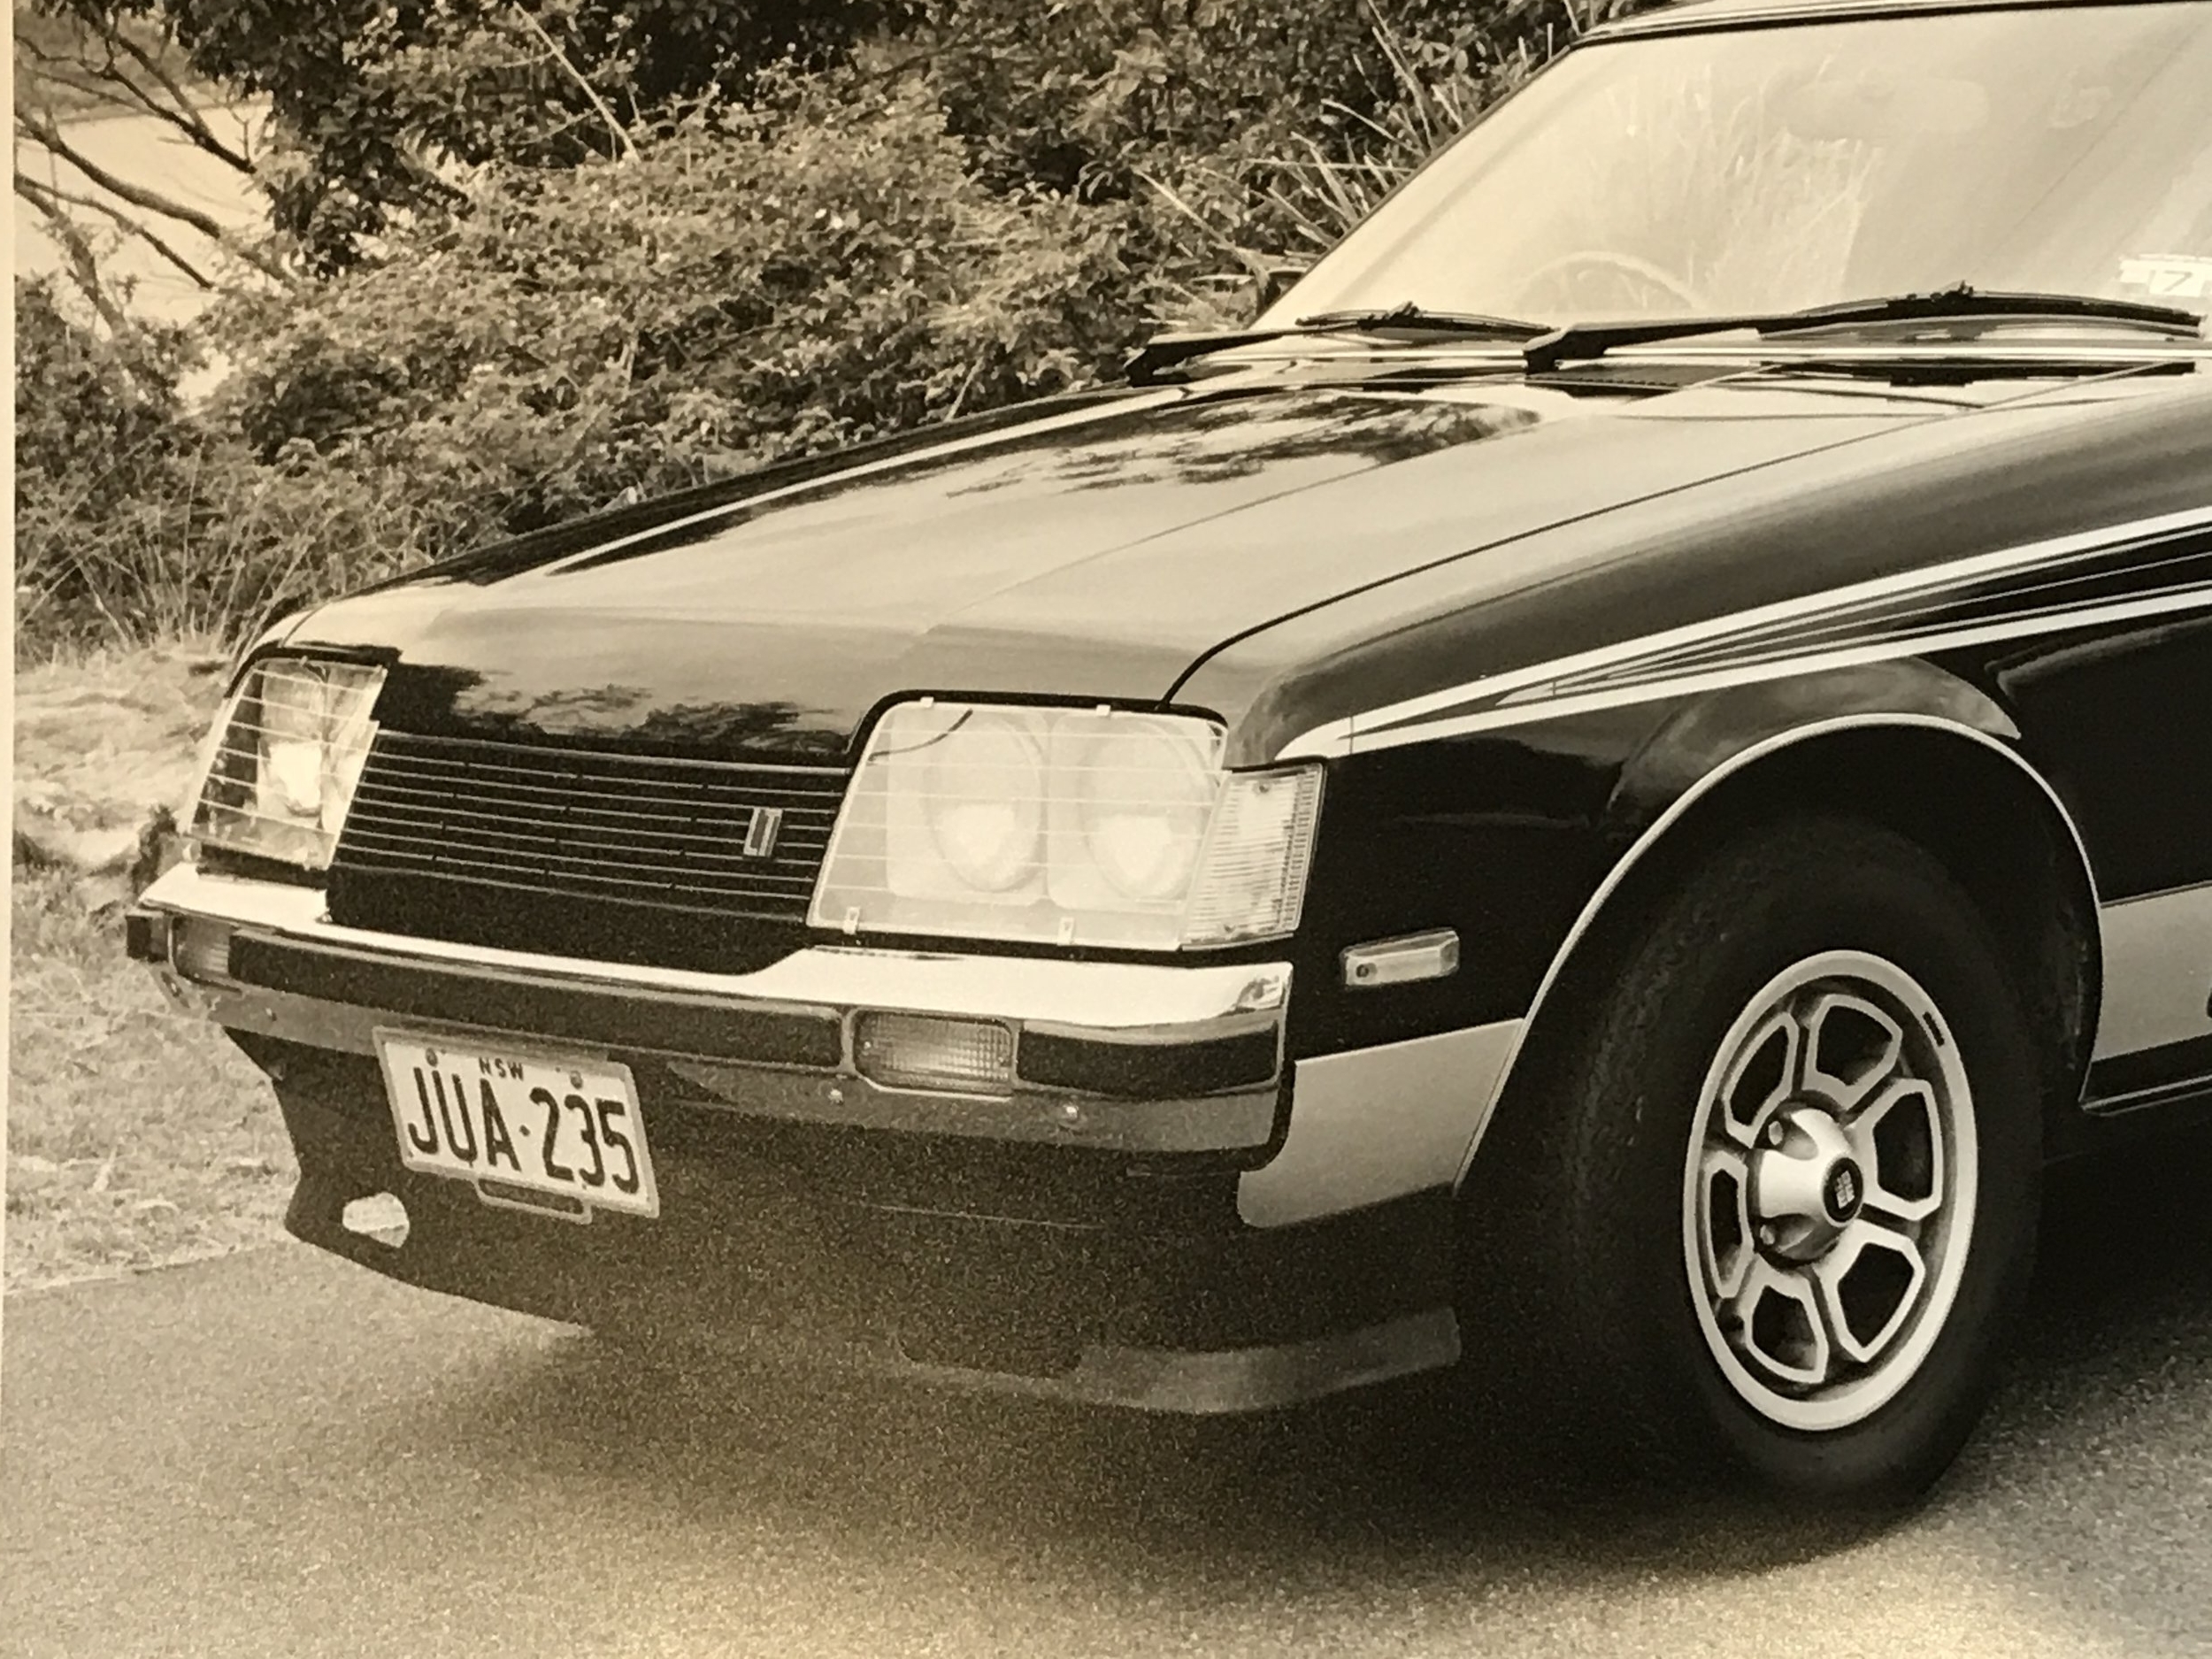 Restyled Toyota Celica 1970s-late 80s